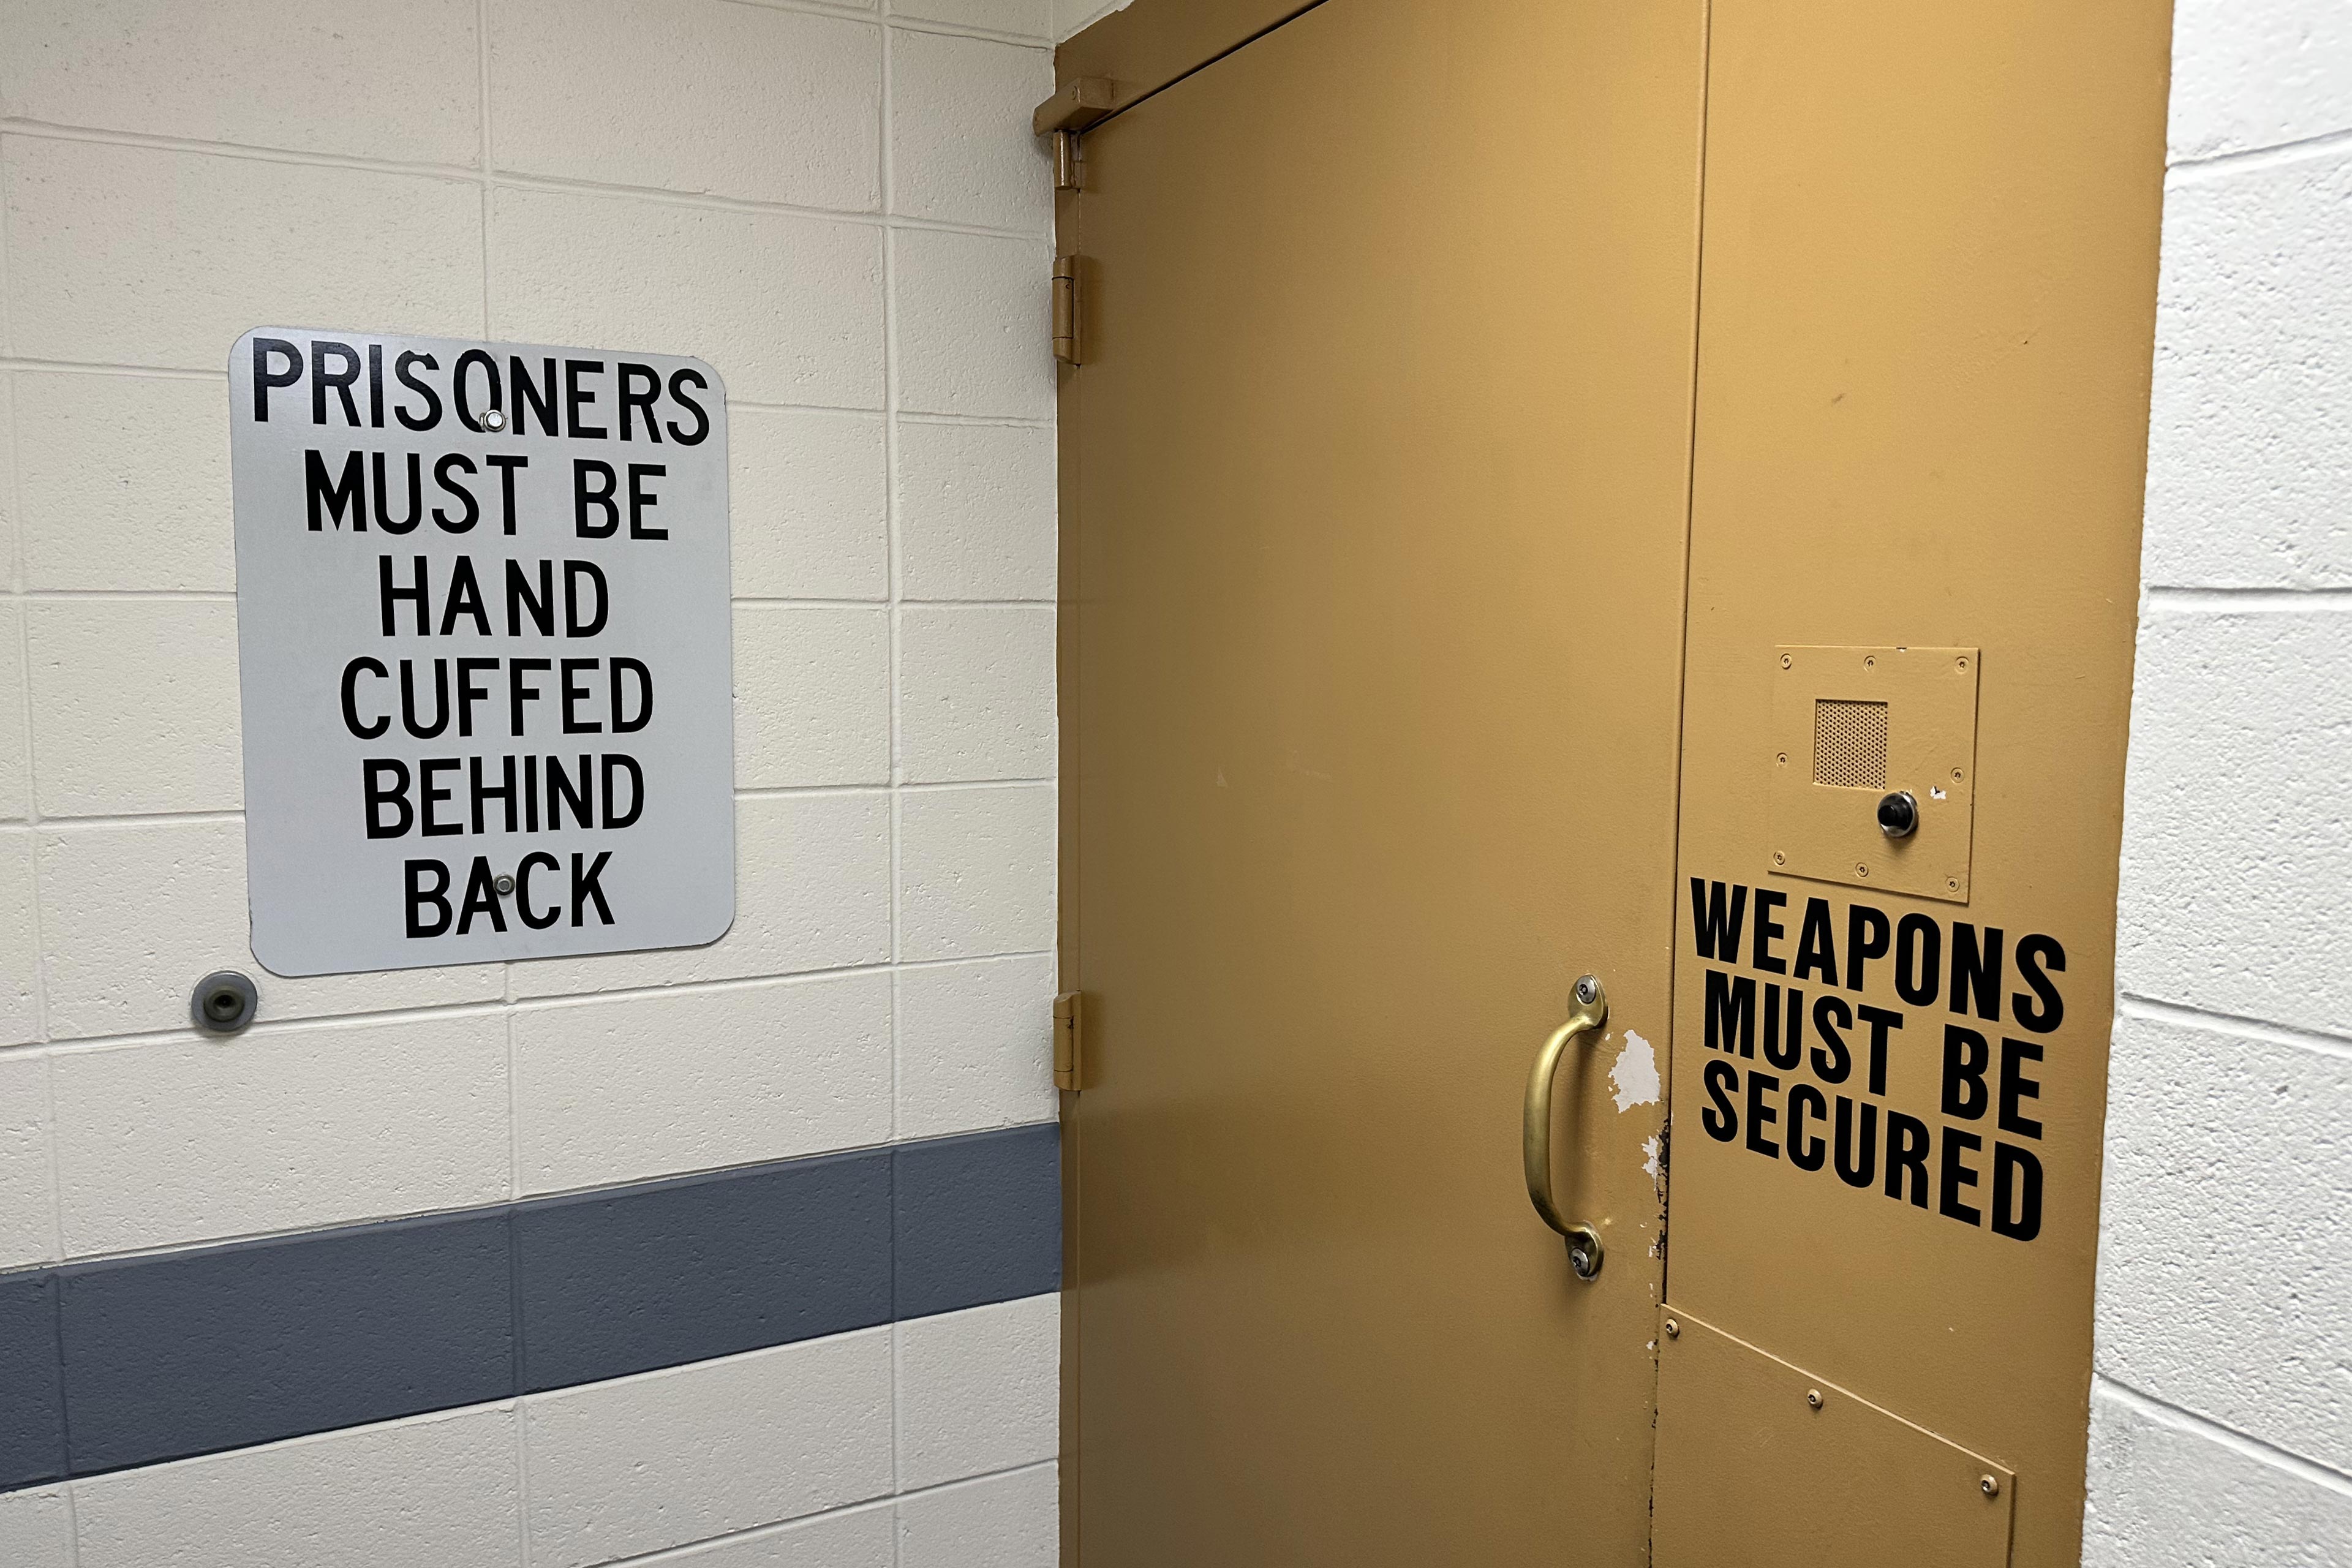 A photo of a sign on a prison wall that reads, "Prisoners must be handcuffed behind back." A door next to it has a sign that reads, "Weapons must be secured."